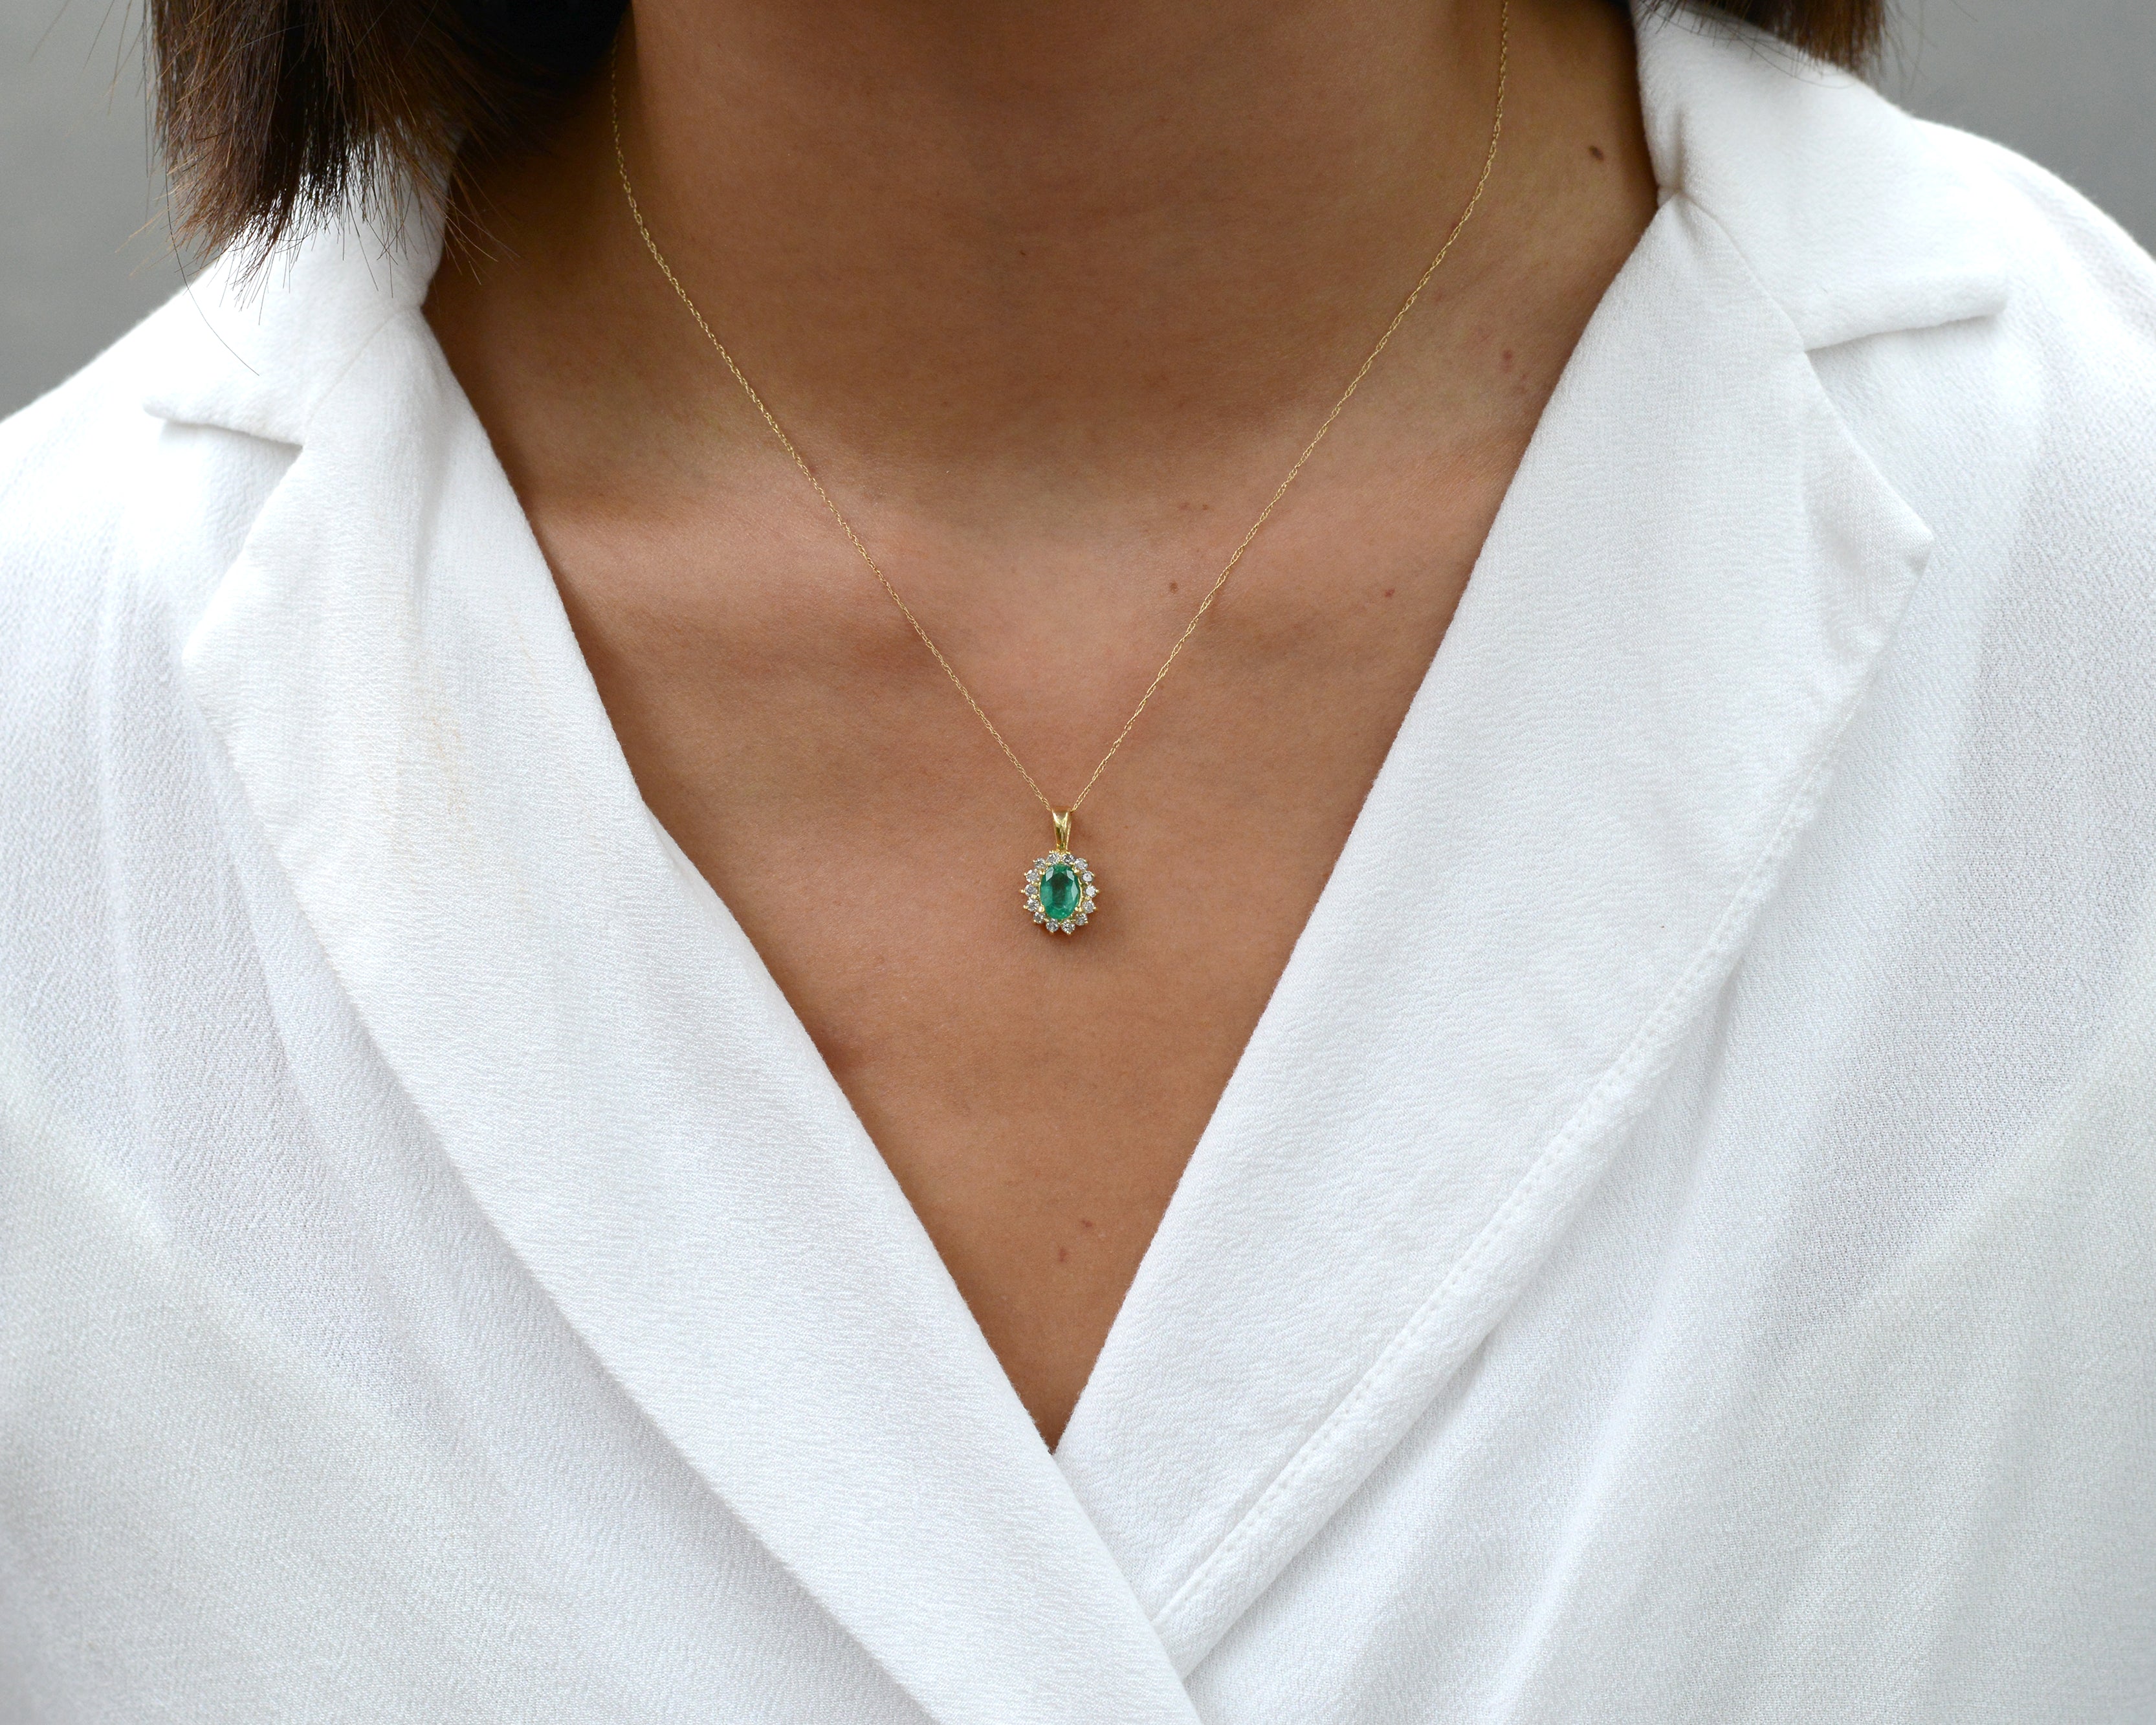 Classic Oval Emerald and Diamond Necklace